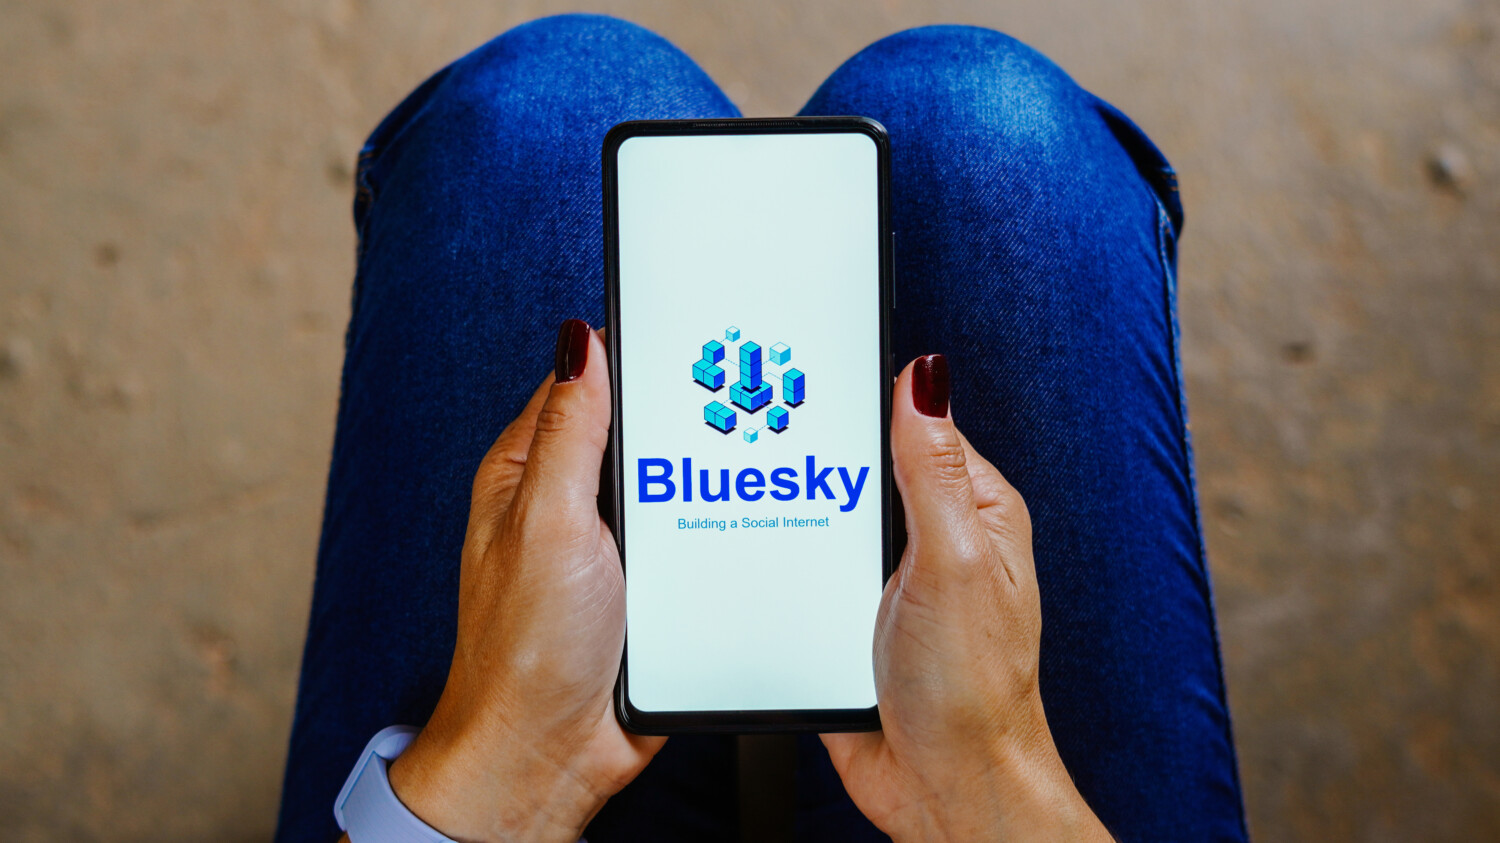 bluesky-responds-to-backlash-allows-users-to-opt-out-of-public-web-interface